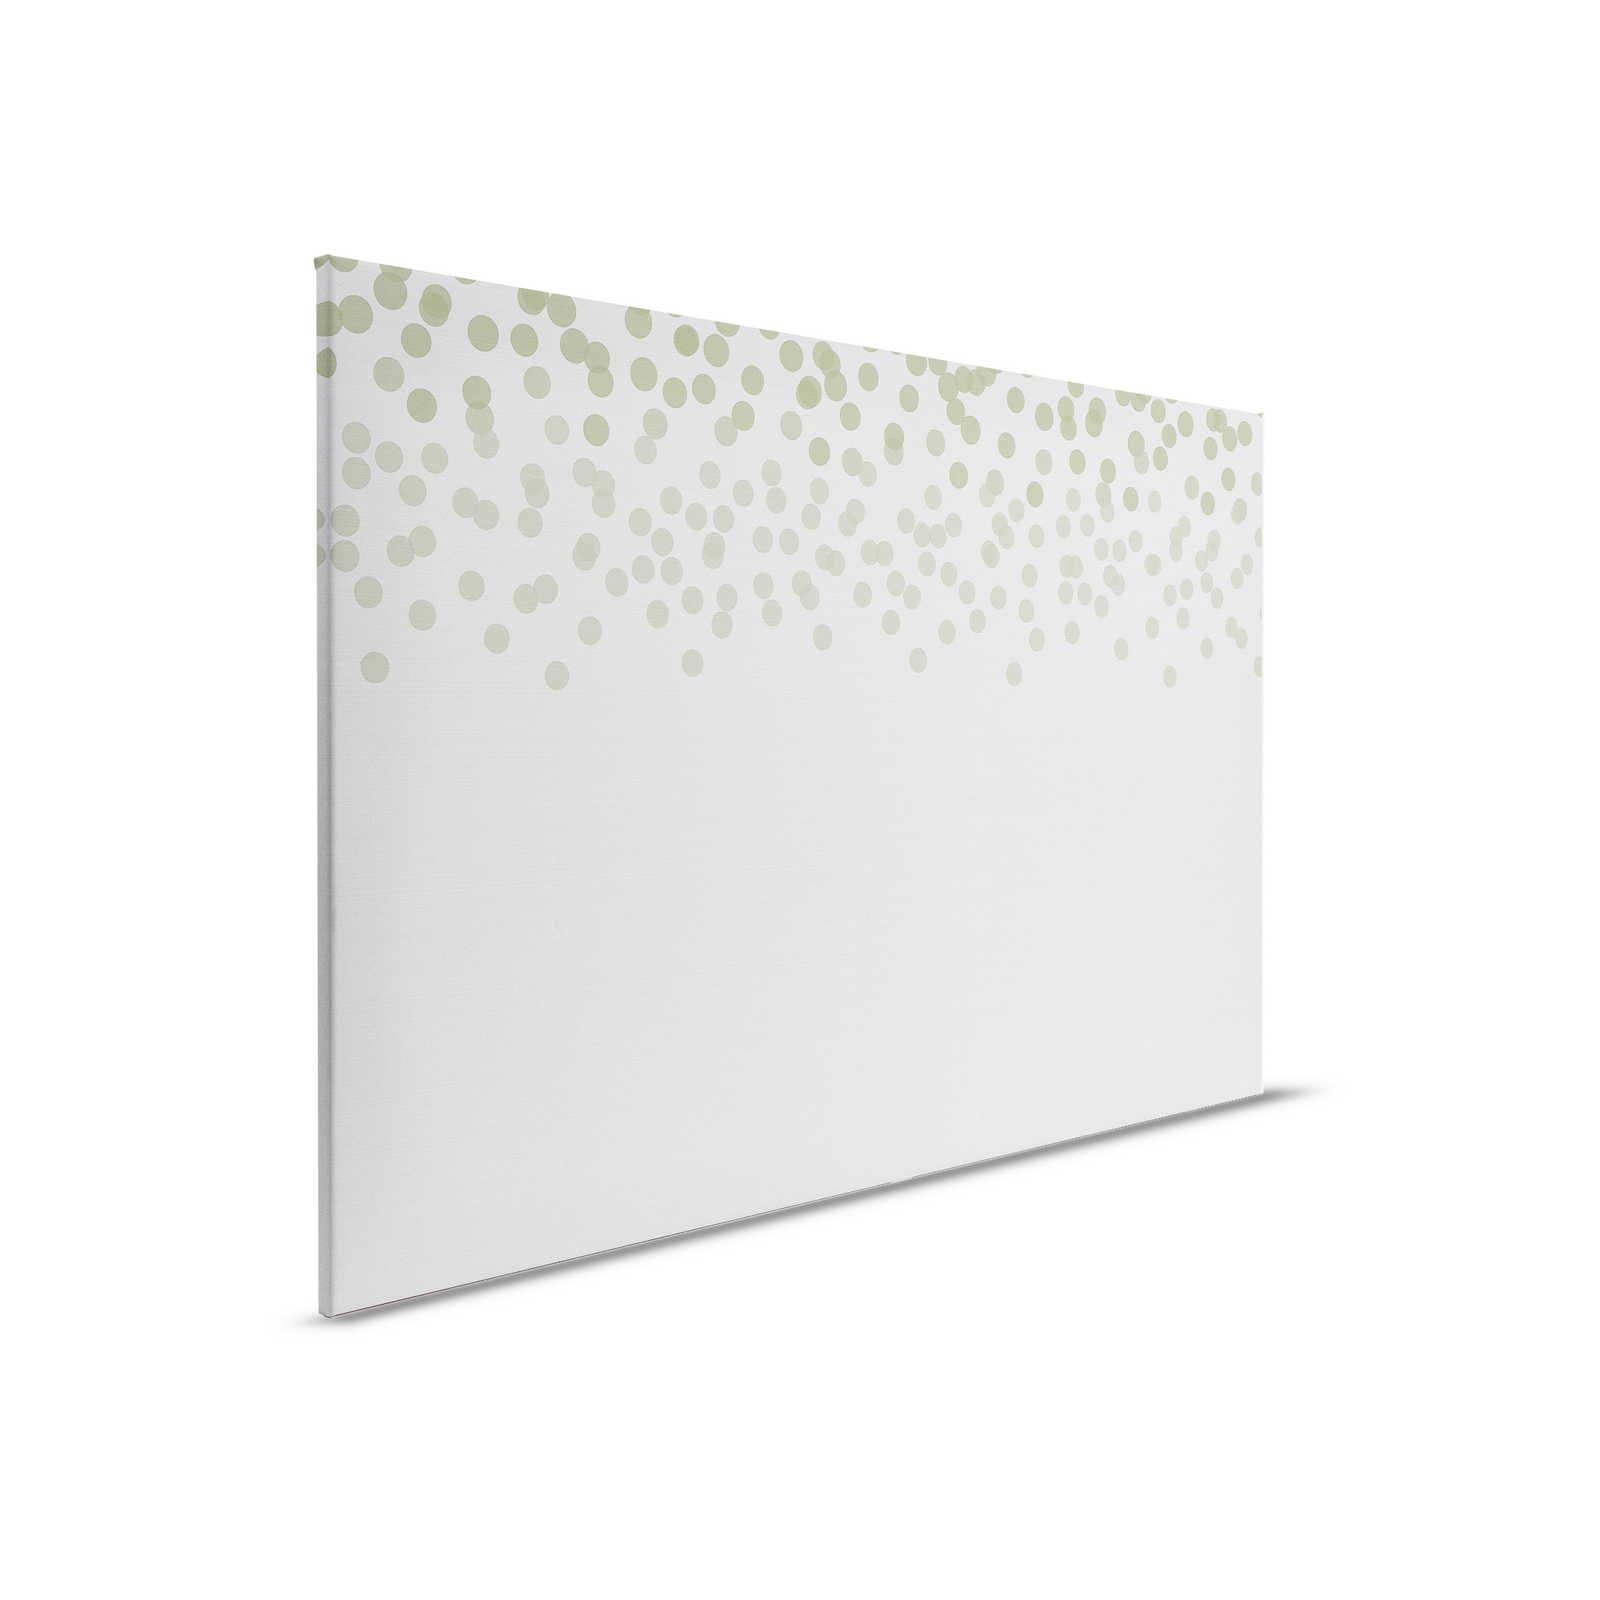         Canvas painting with discreet dot pattern | green, grey - 0.90 m x 0.60 m
    